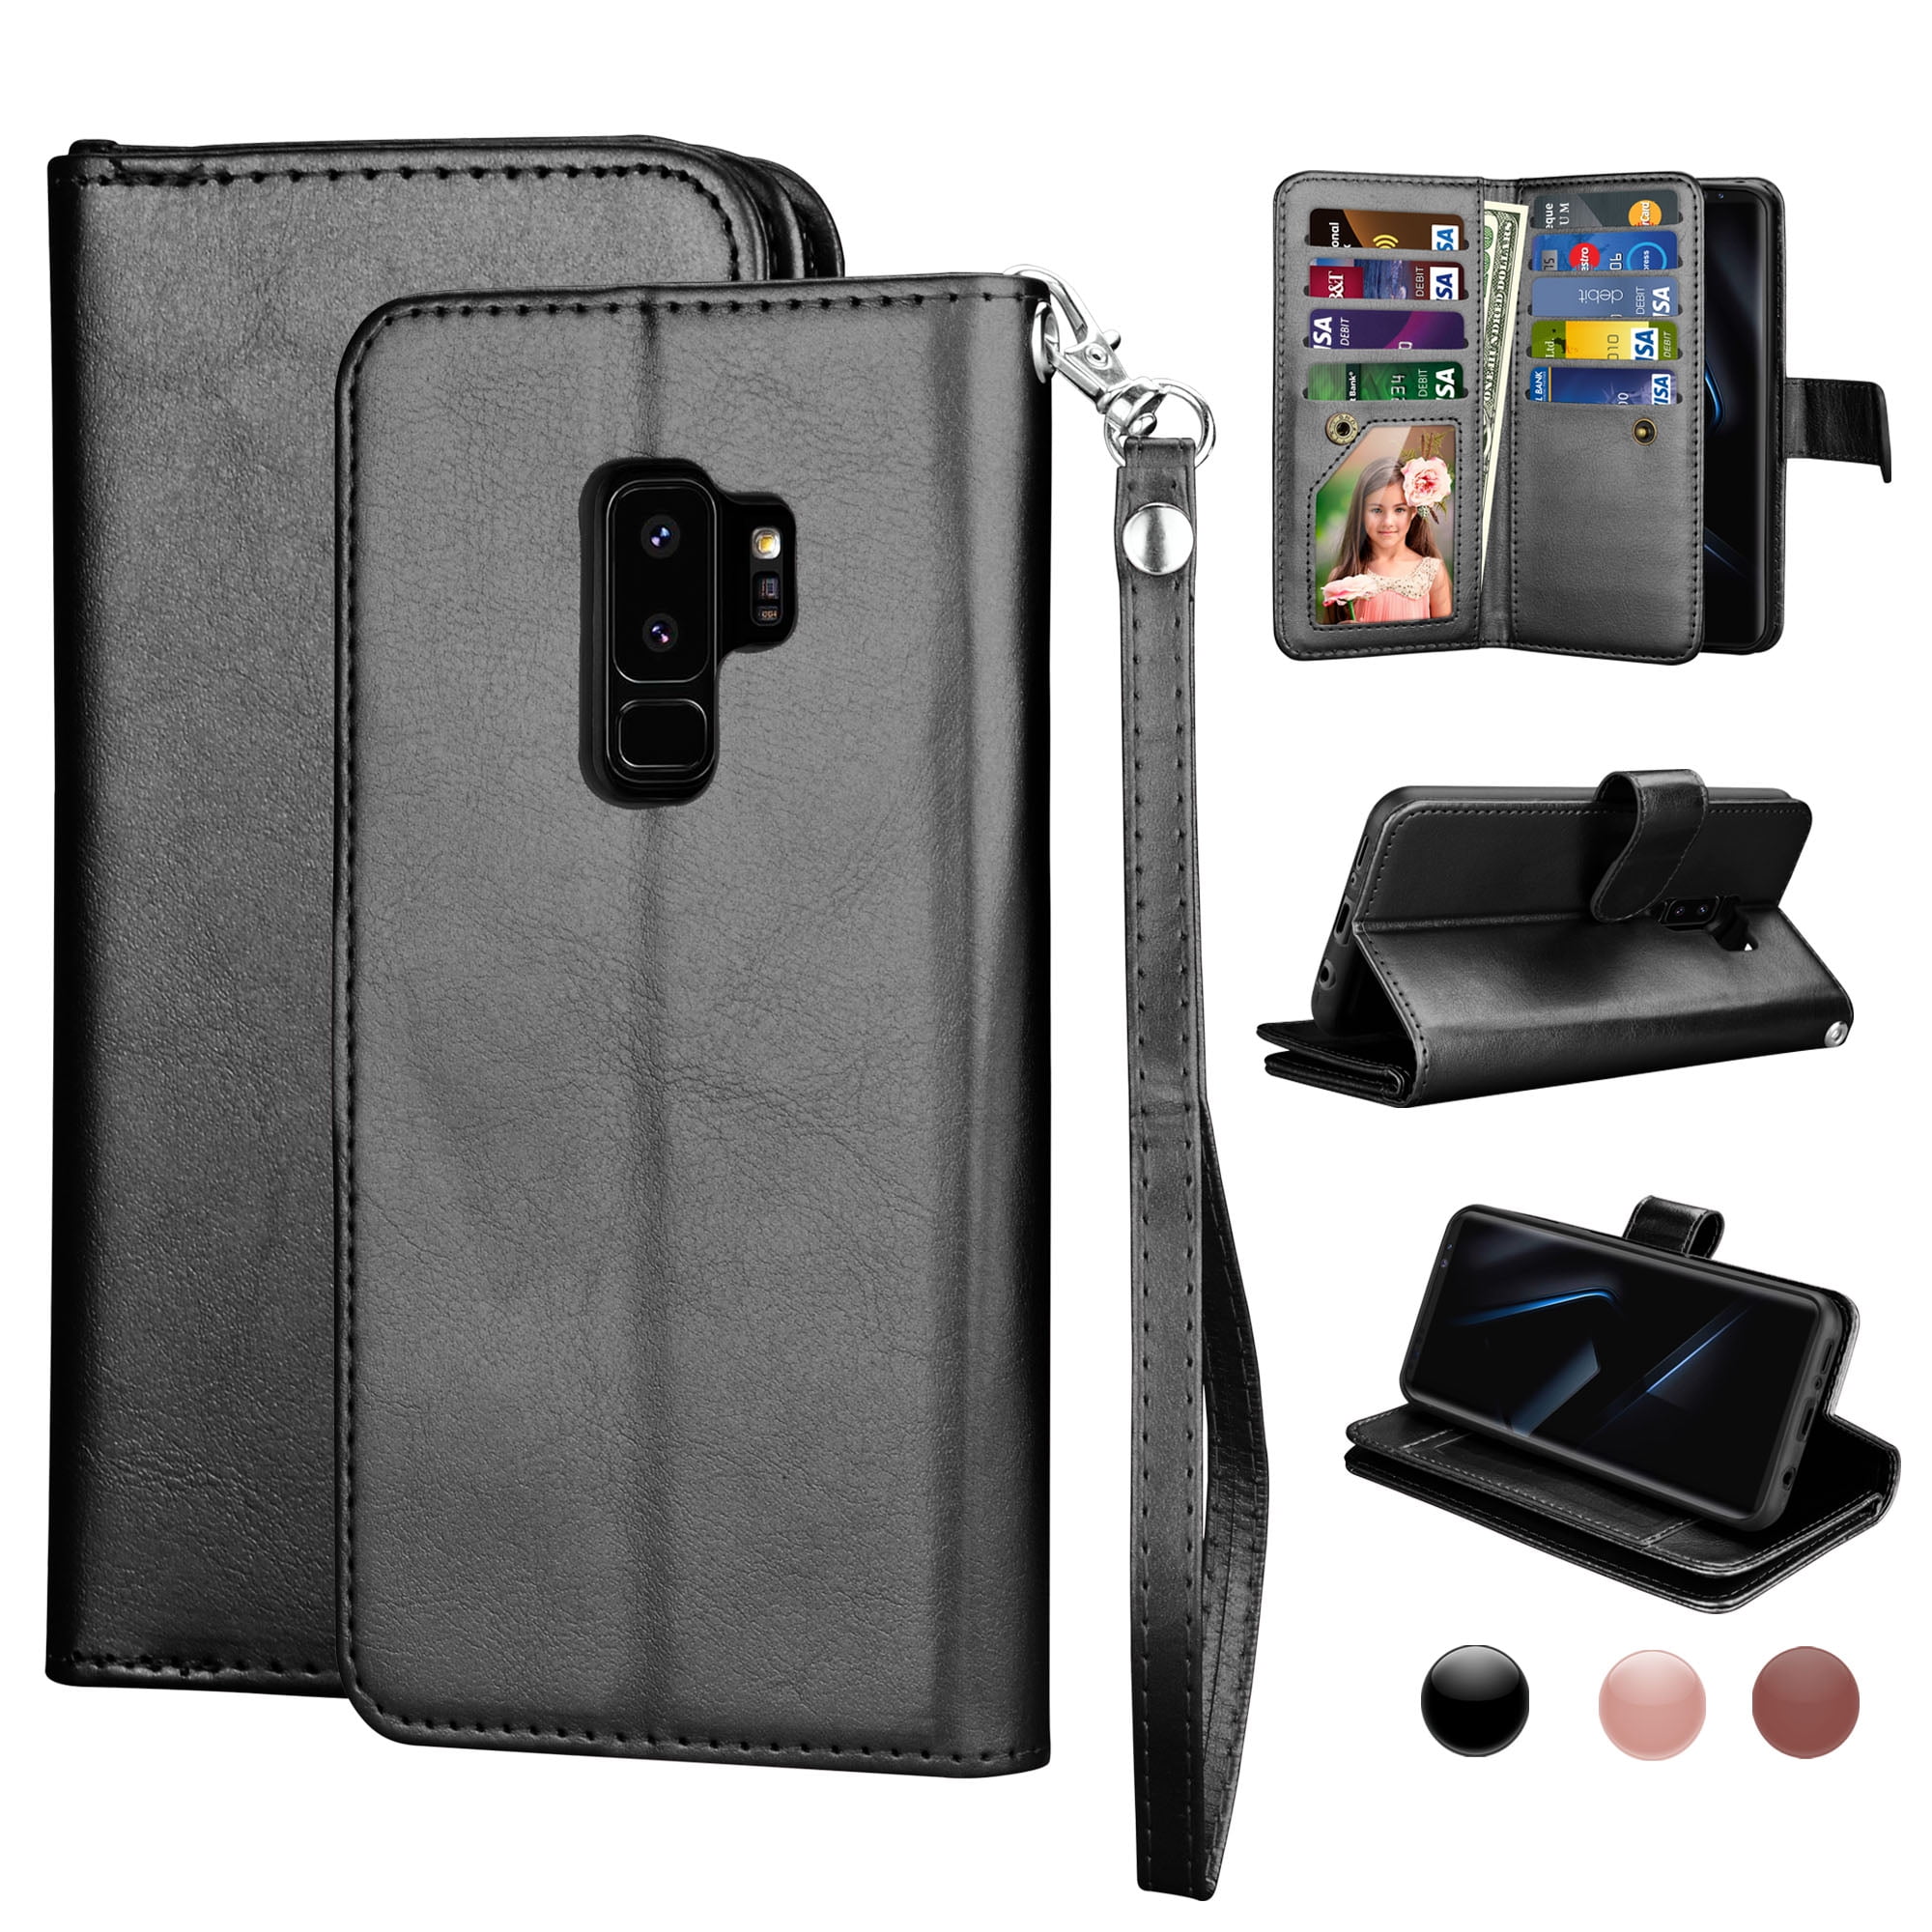 PU Leather Flip Cover Compatible with Samsung Galaxy S10 Elegant Dark Blue Wallet Case for Samsung Galaxy S10